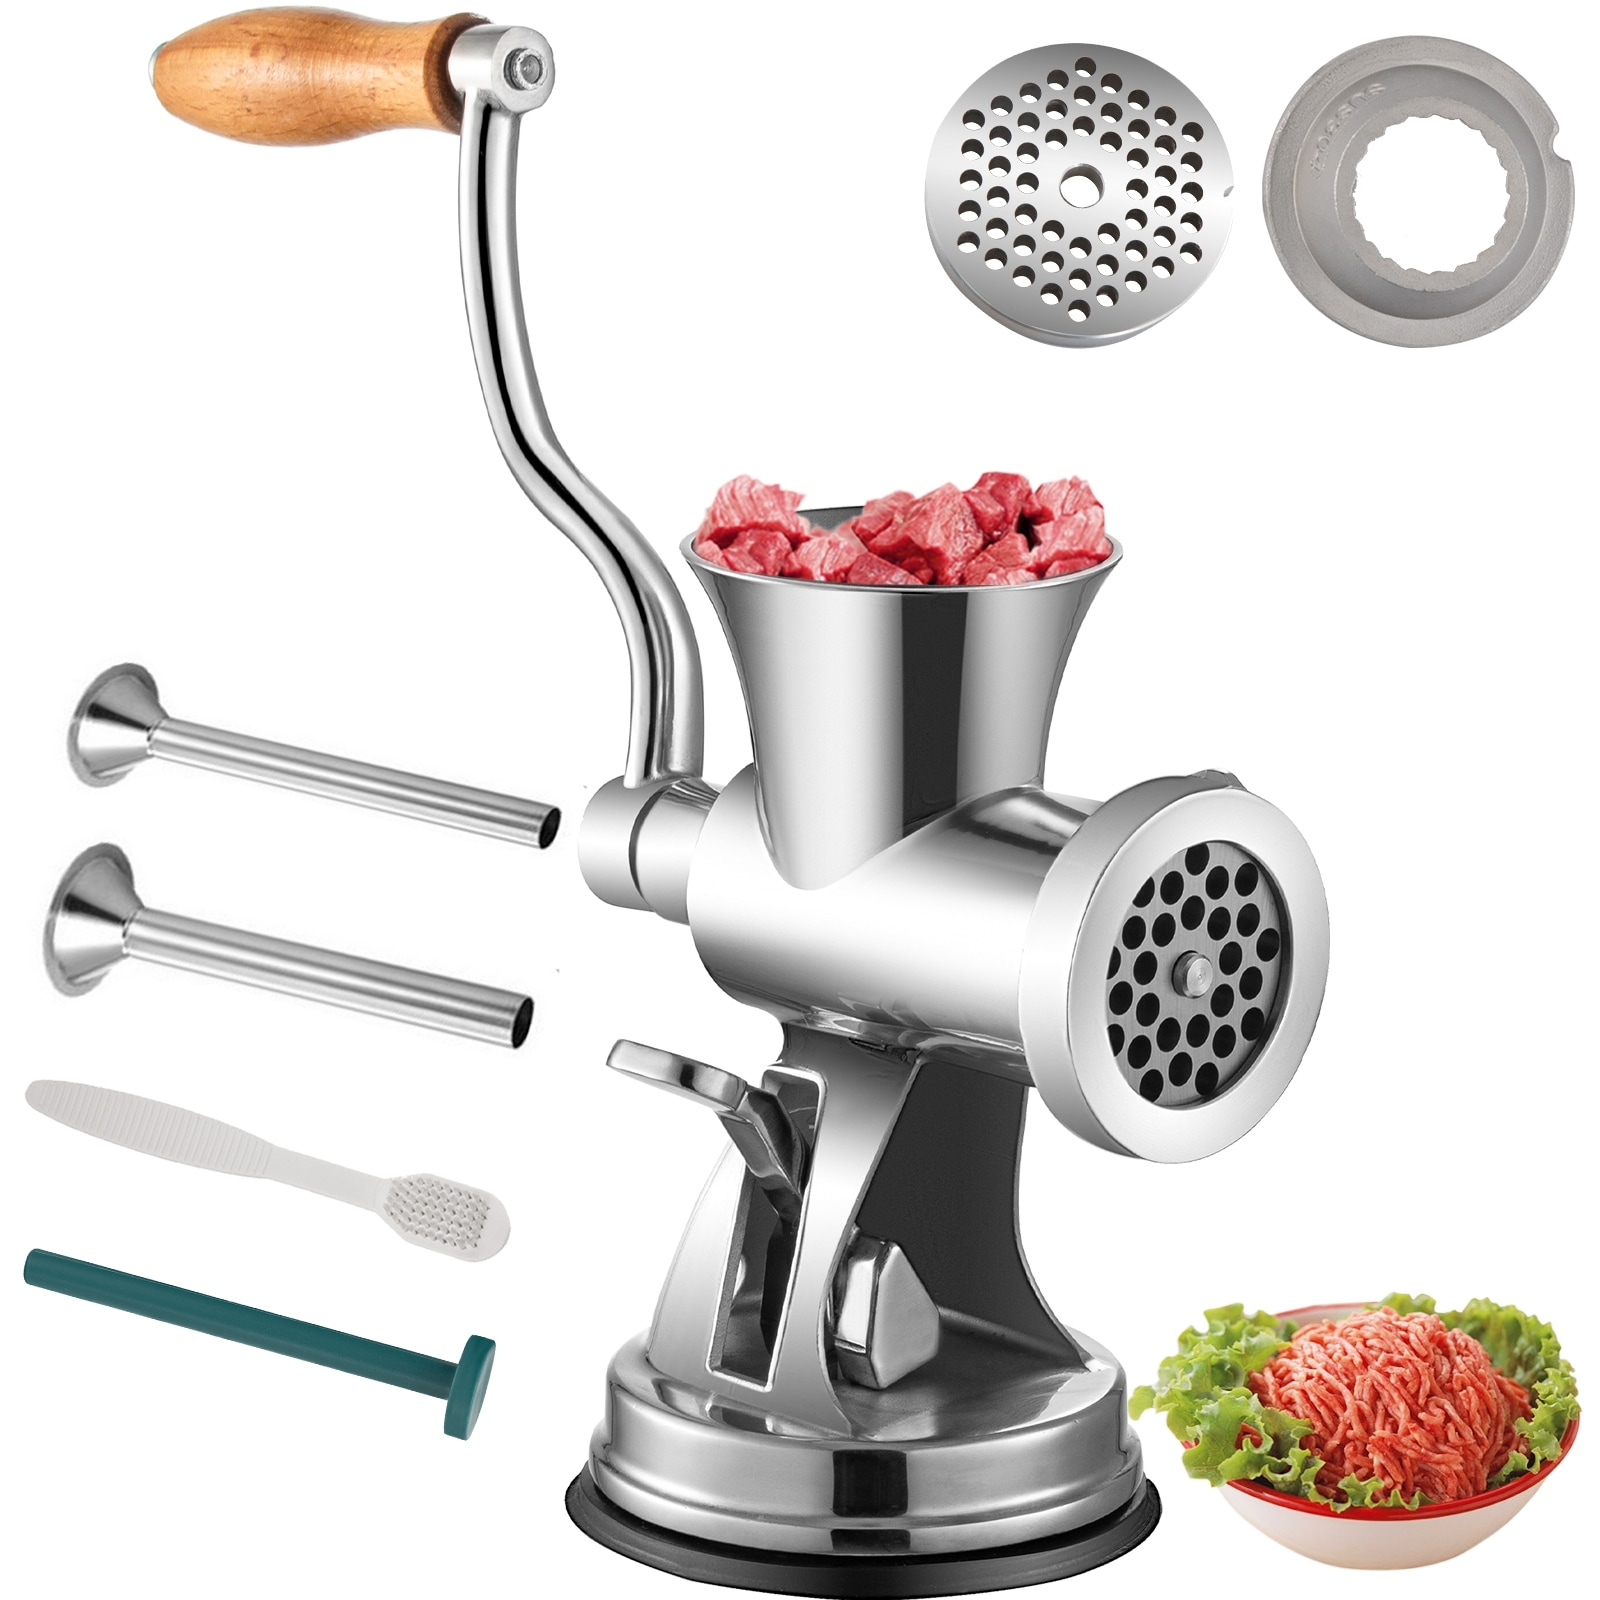 https://ak1.ostkcdn.com/images/products/is/images/direct/00d6335719567d5eae3f232b6da88efdb907072c/VEVOR-Meat-Grinder-Manual-304-Stainless-Steel-Hand-Operated-Meat-Grinder-Multifunctional-Crank-Sausage-Maker-Coffee-Powder.jpg